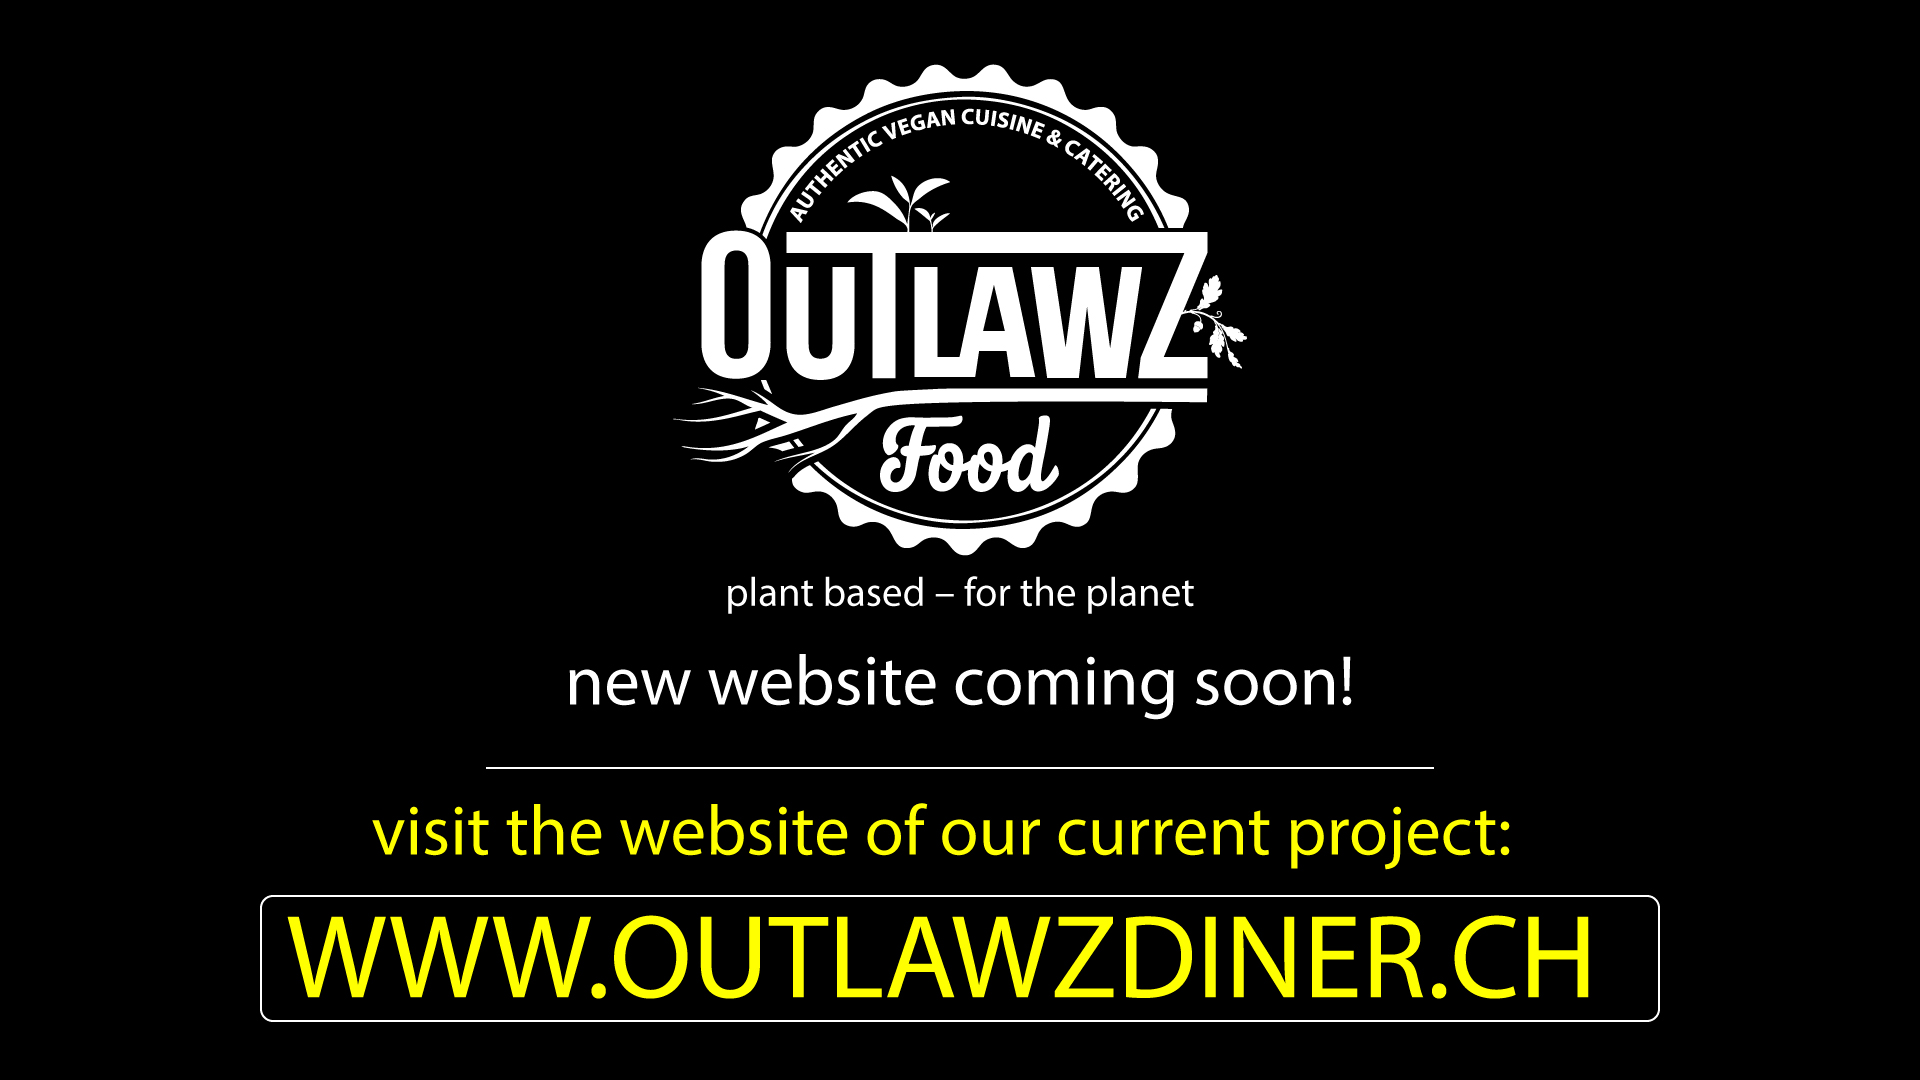 New website coming soon. Visit www.outlawzdiner.ch for our new project.